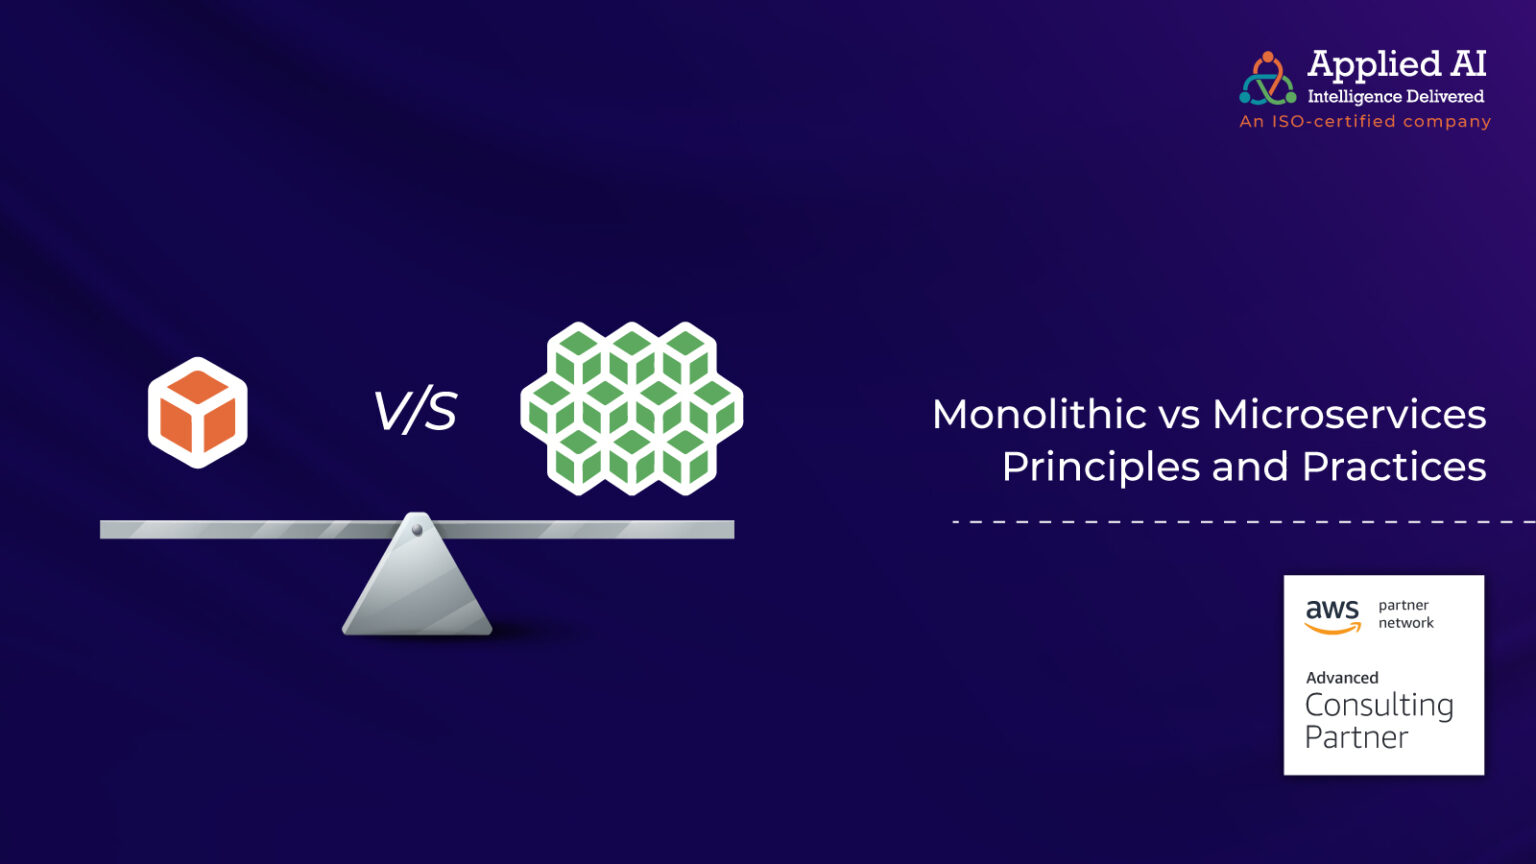 Monolithic Vs Microservices Principles and Practices